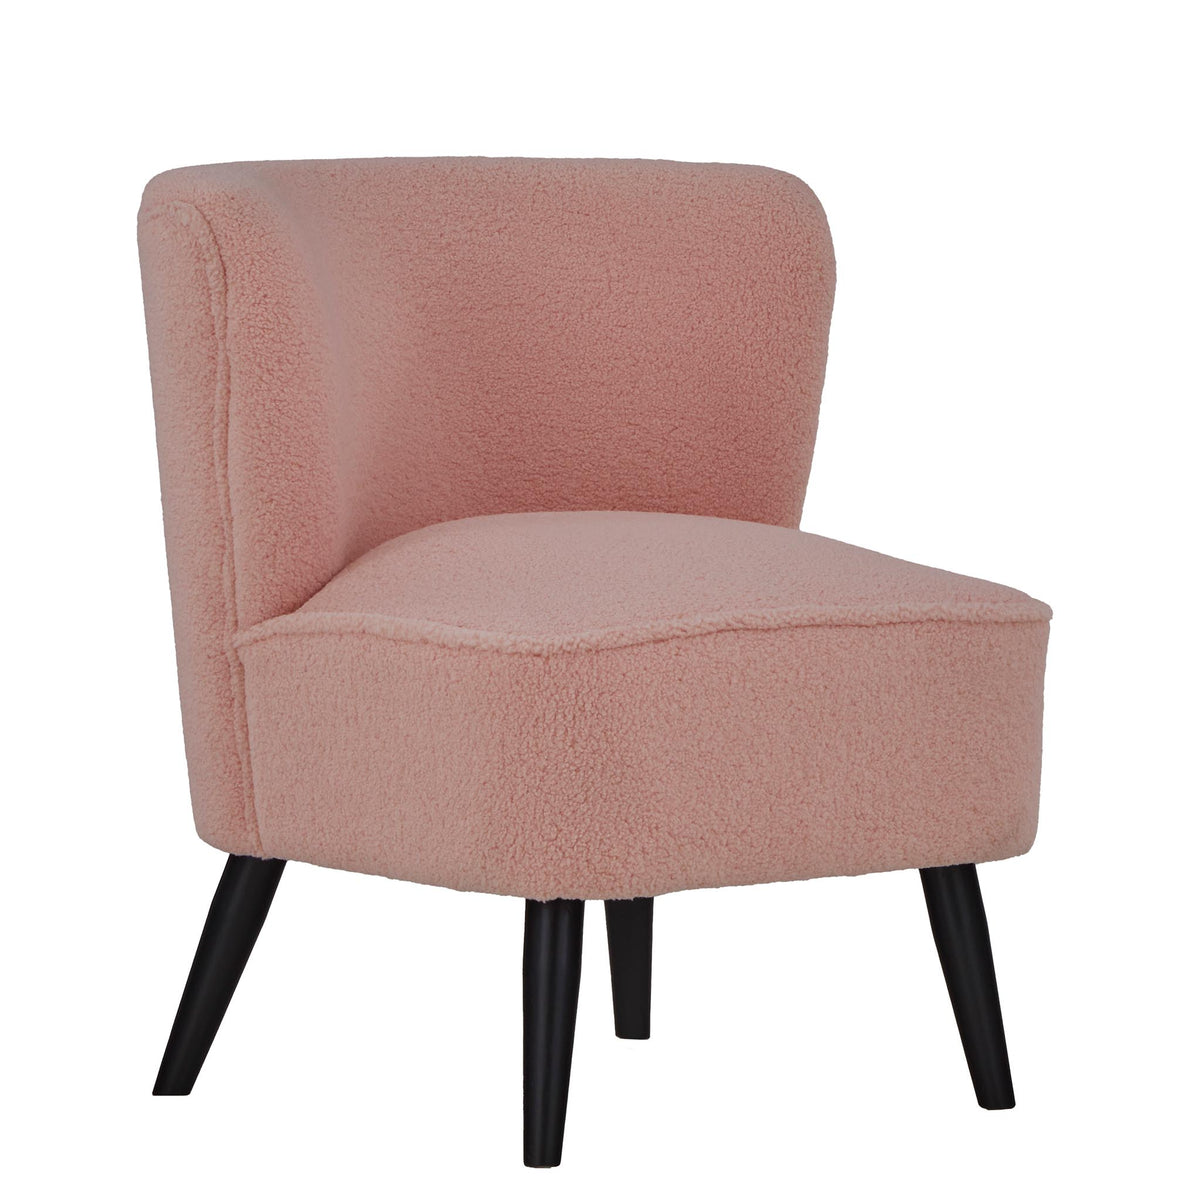 Malmesbury Teddy Accent Chair - Baby Pink